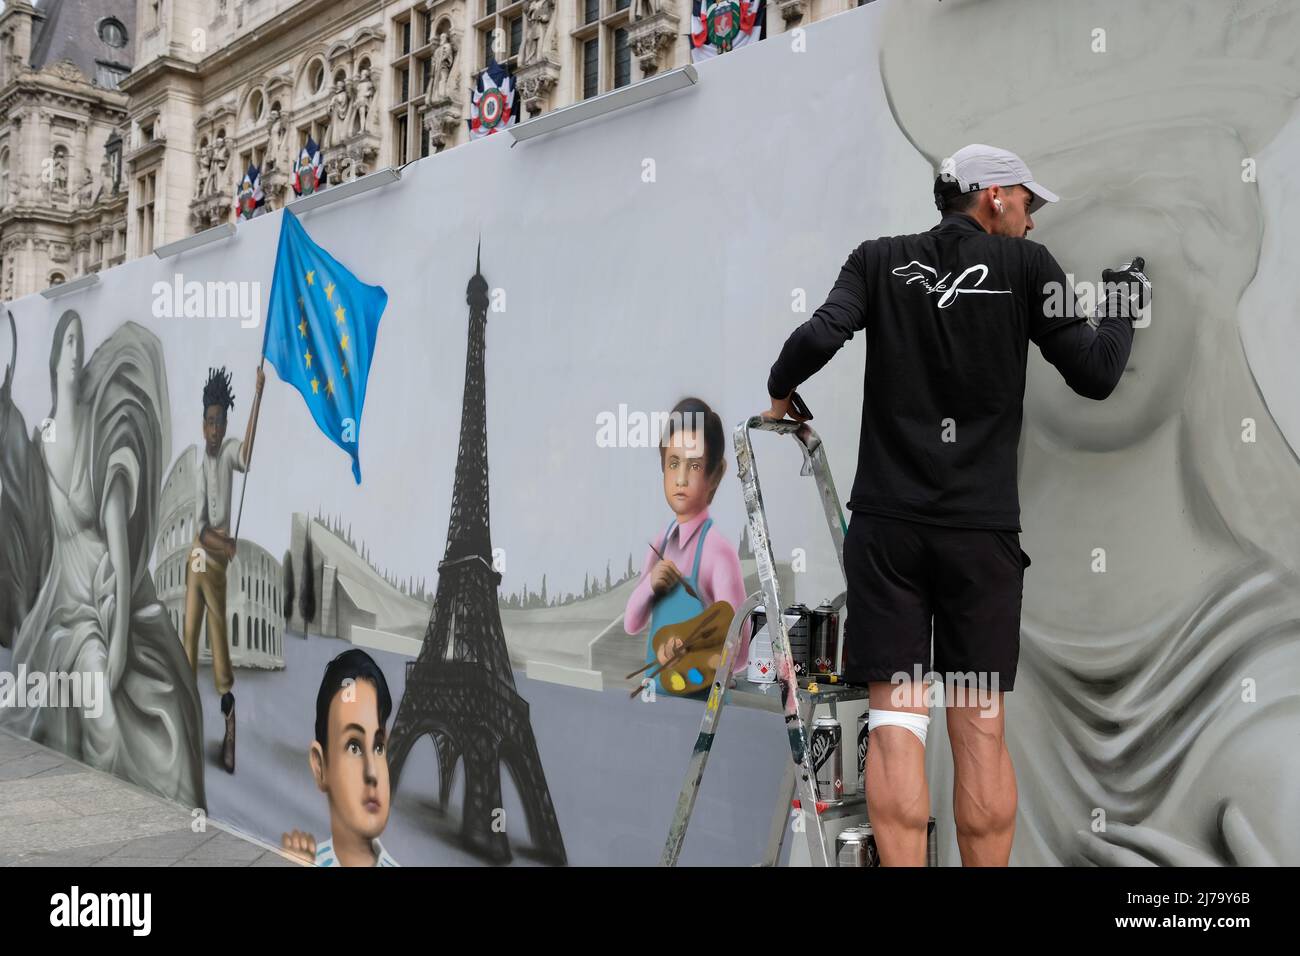 On Saturday 7 May, a Europe Day was organised on the square in front of the Paris City Hall, with stands for NGOs and a conference room Stock Photo